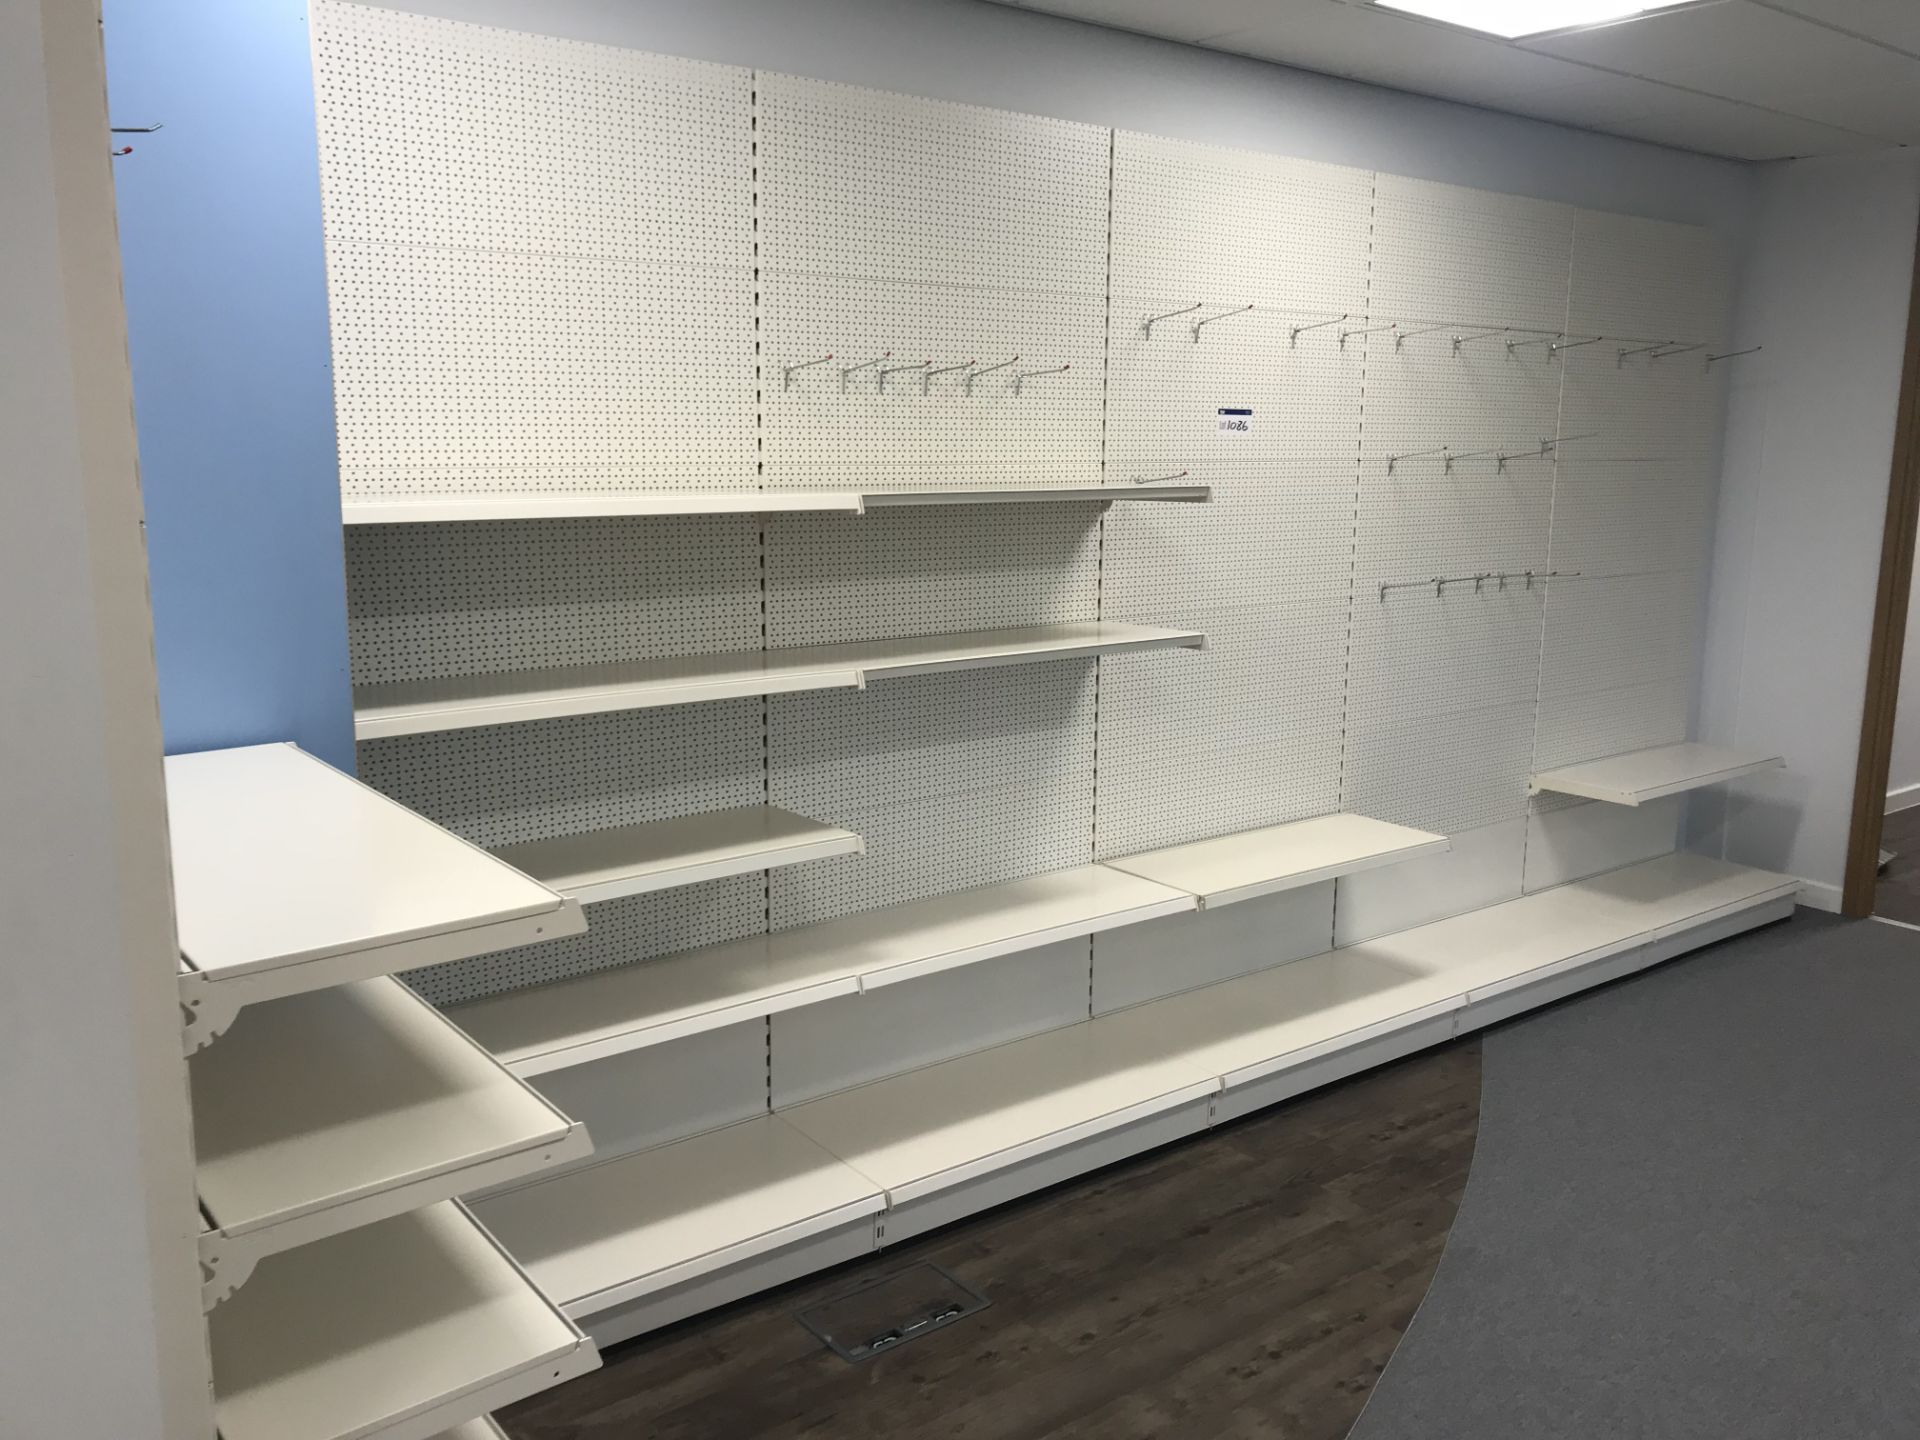 8 x Bays of Single Sided Cantilever Shelving